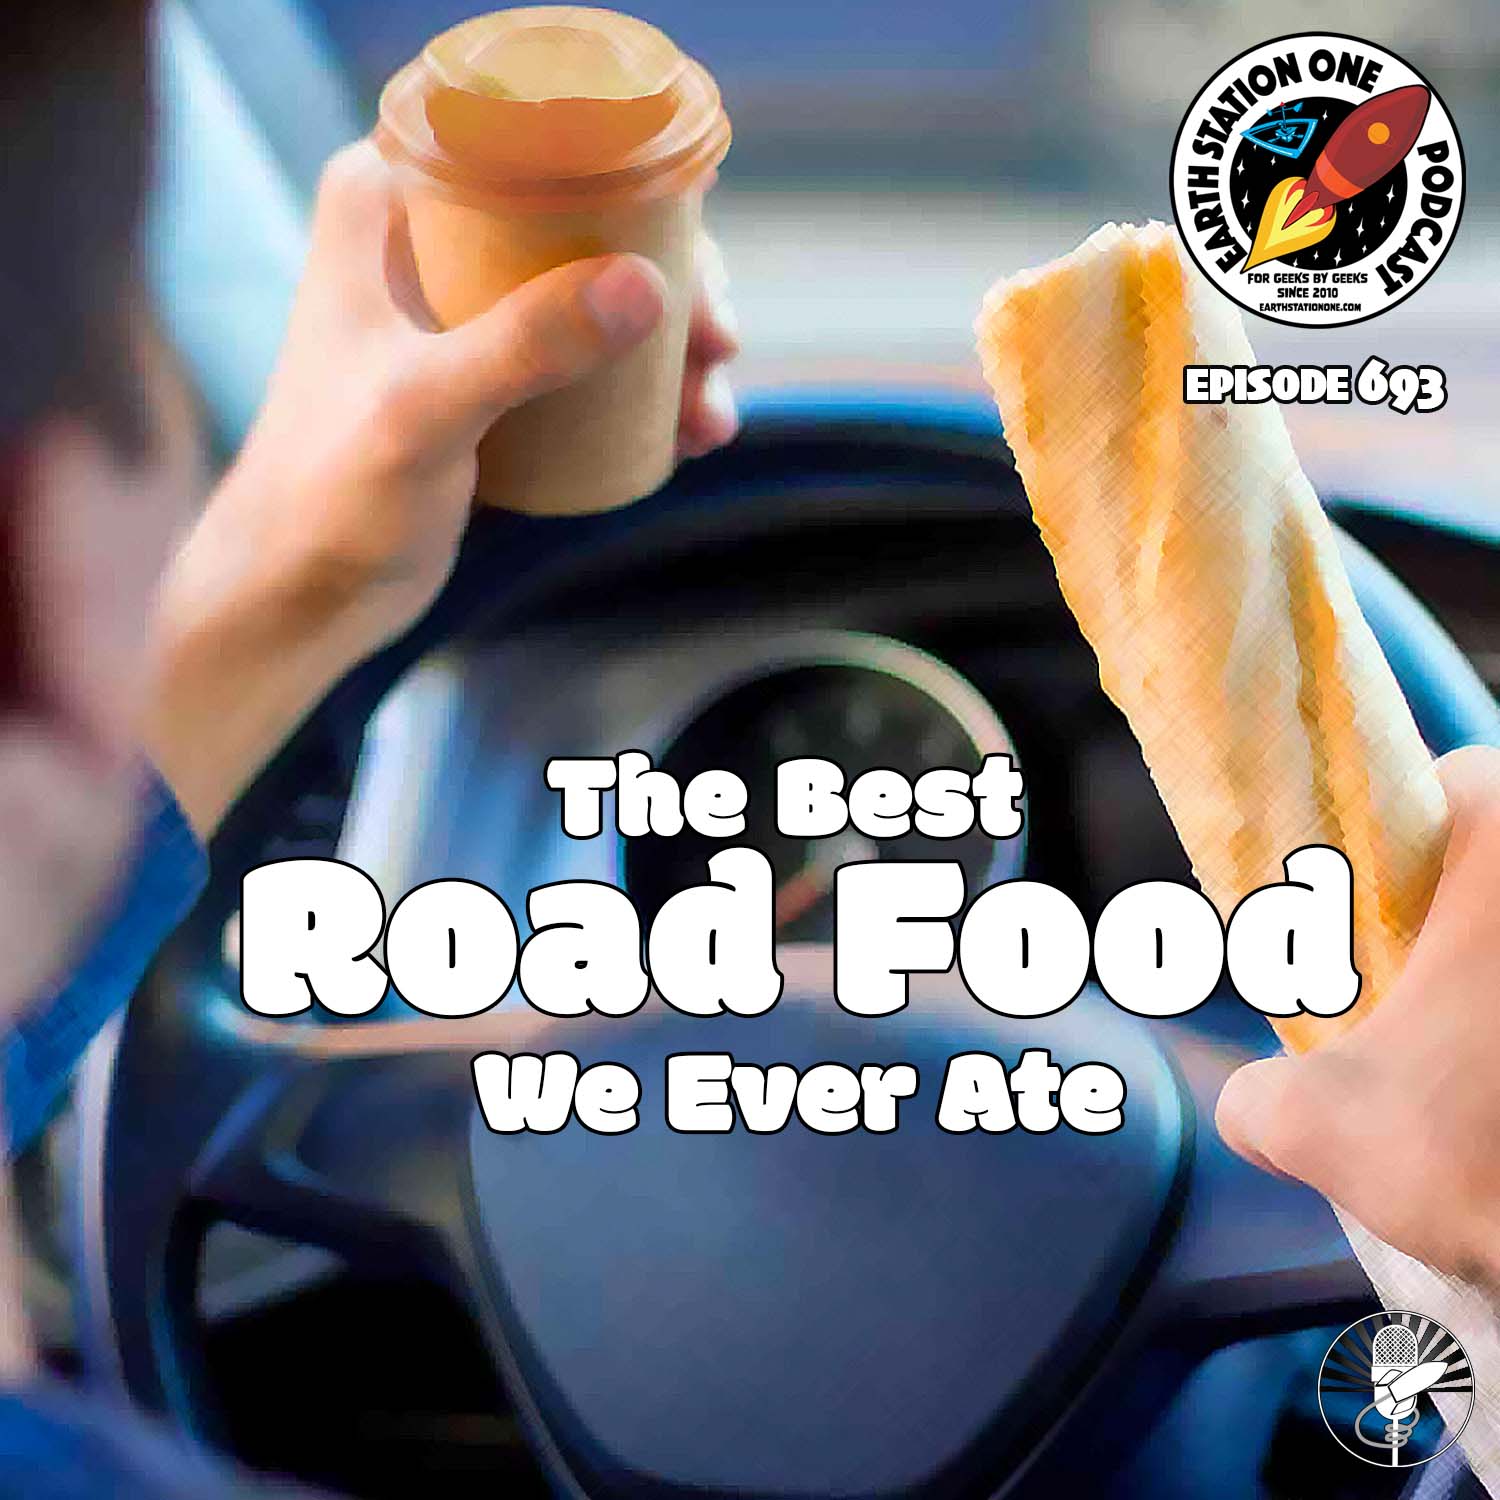 The Earth Station One Podcast Ep 693 - The Best Road Food We Ever Ate